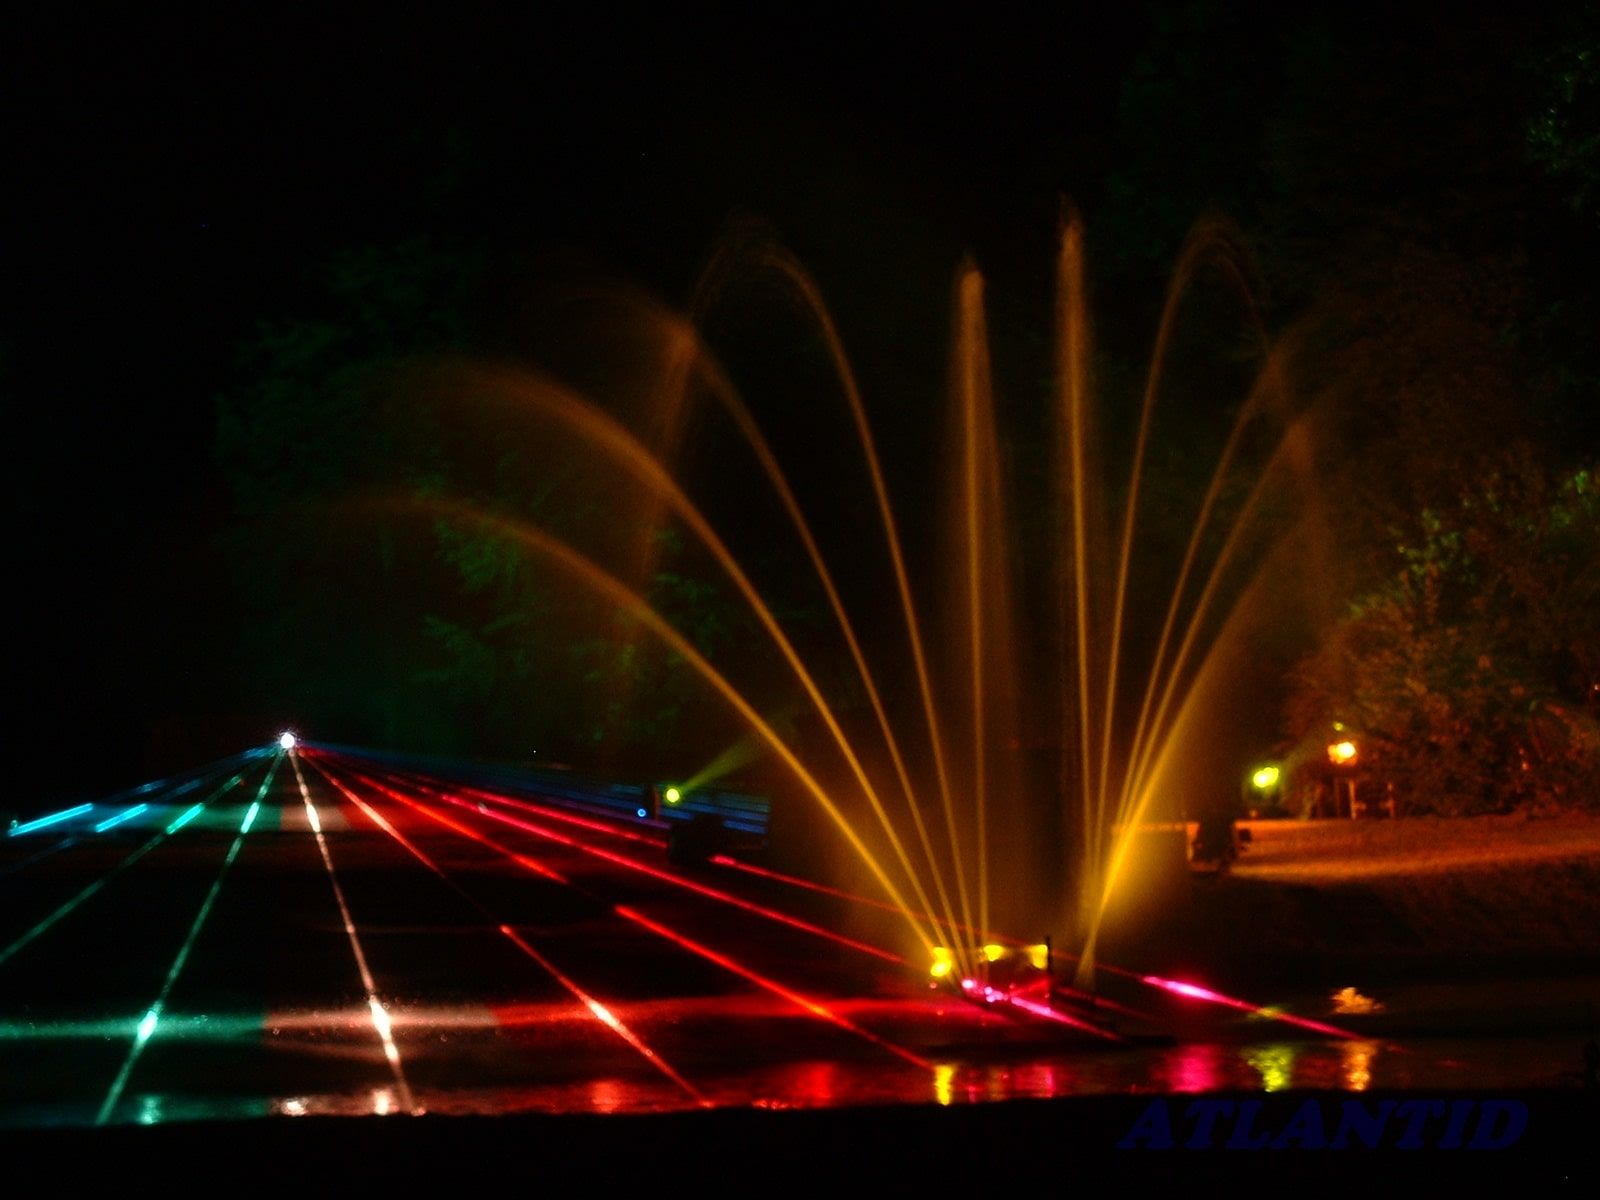 Europe Évènement - Photo of blue, green and red laser beams with orange fountain jets